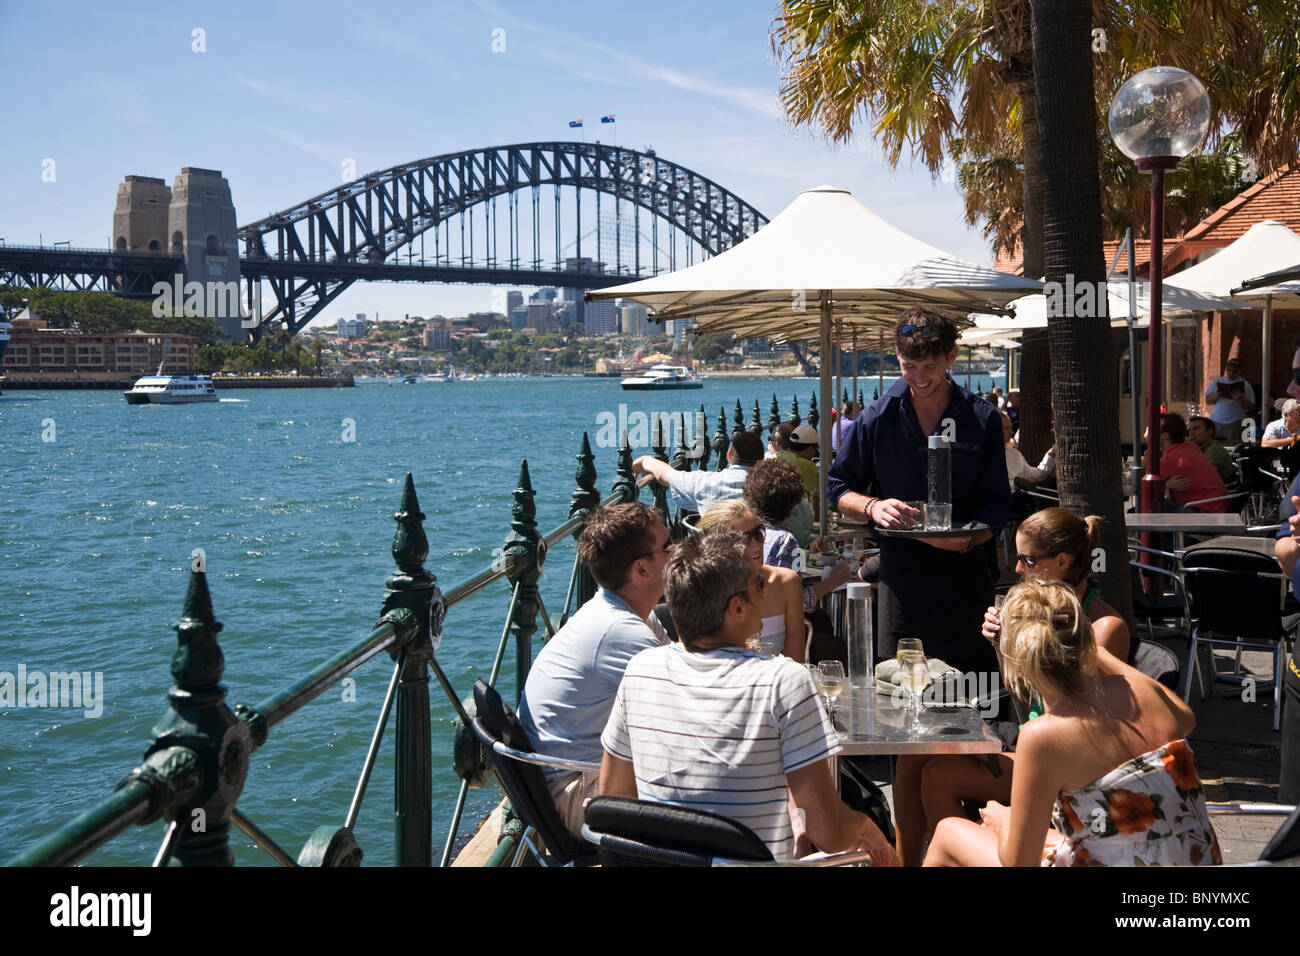 Waterfront dining at Circular Quay with views over Sydney harbour